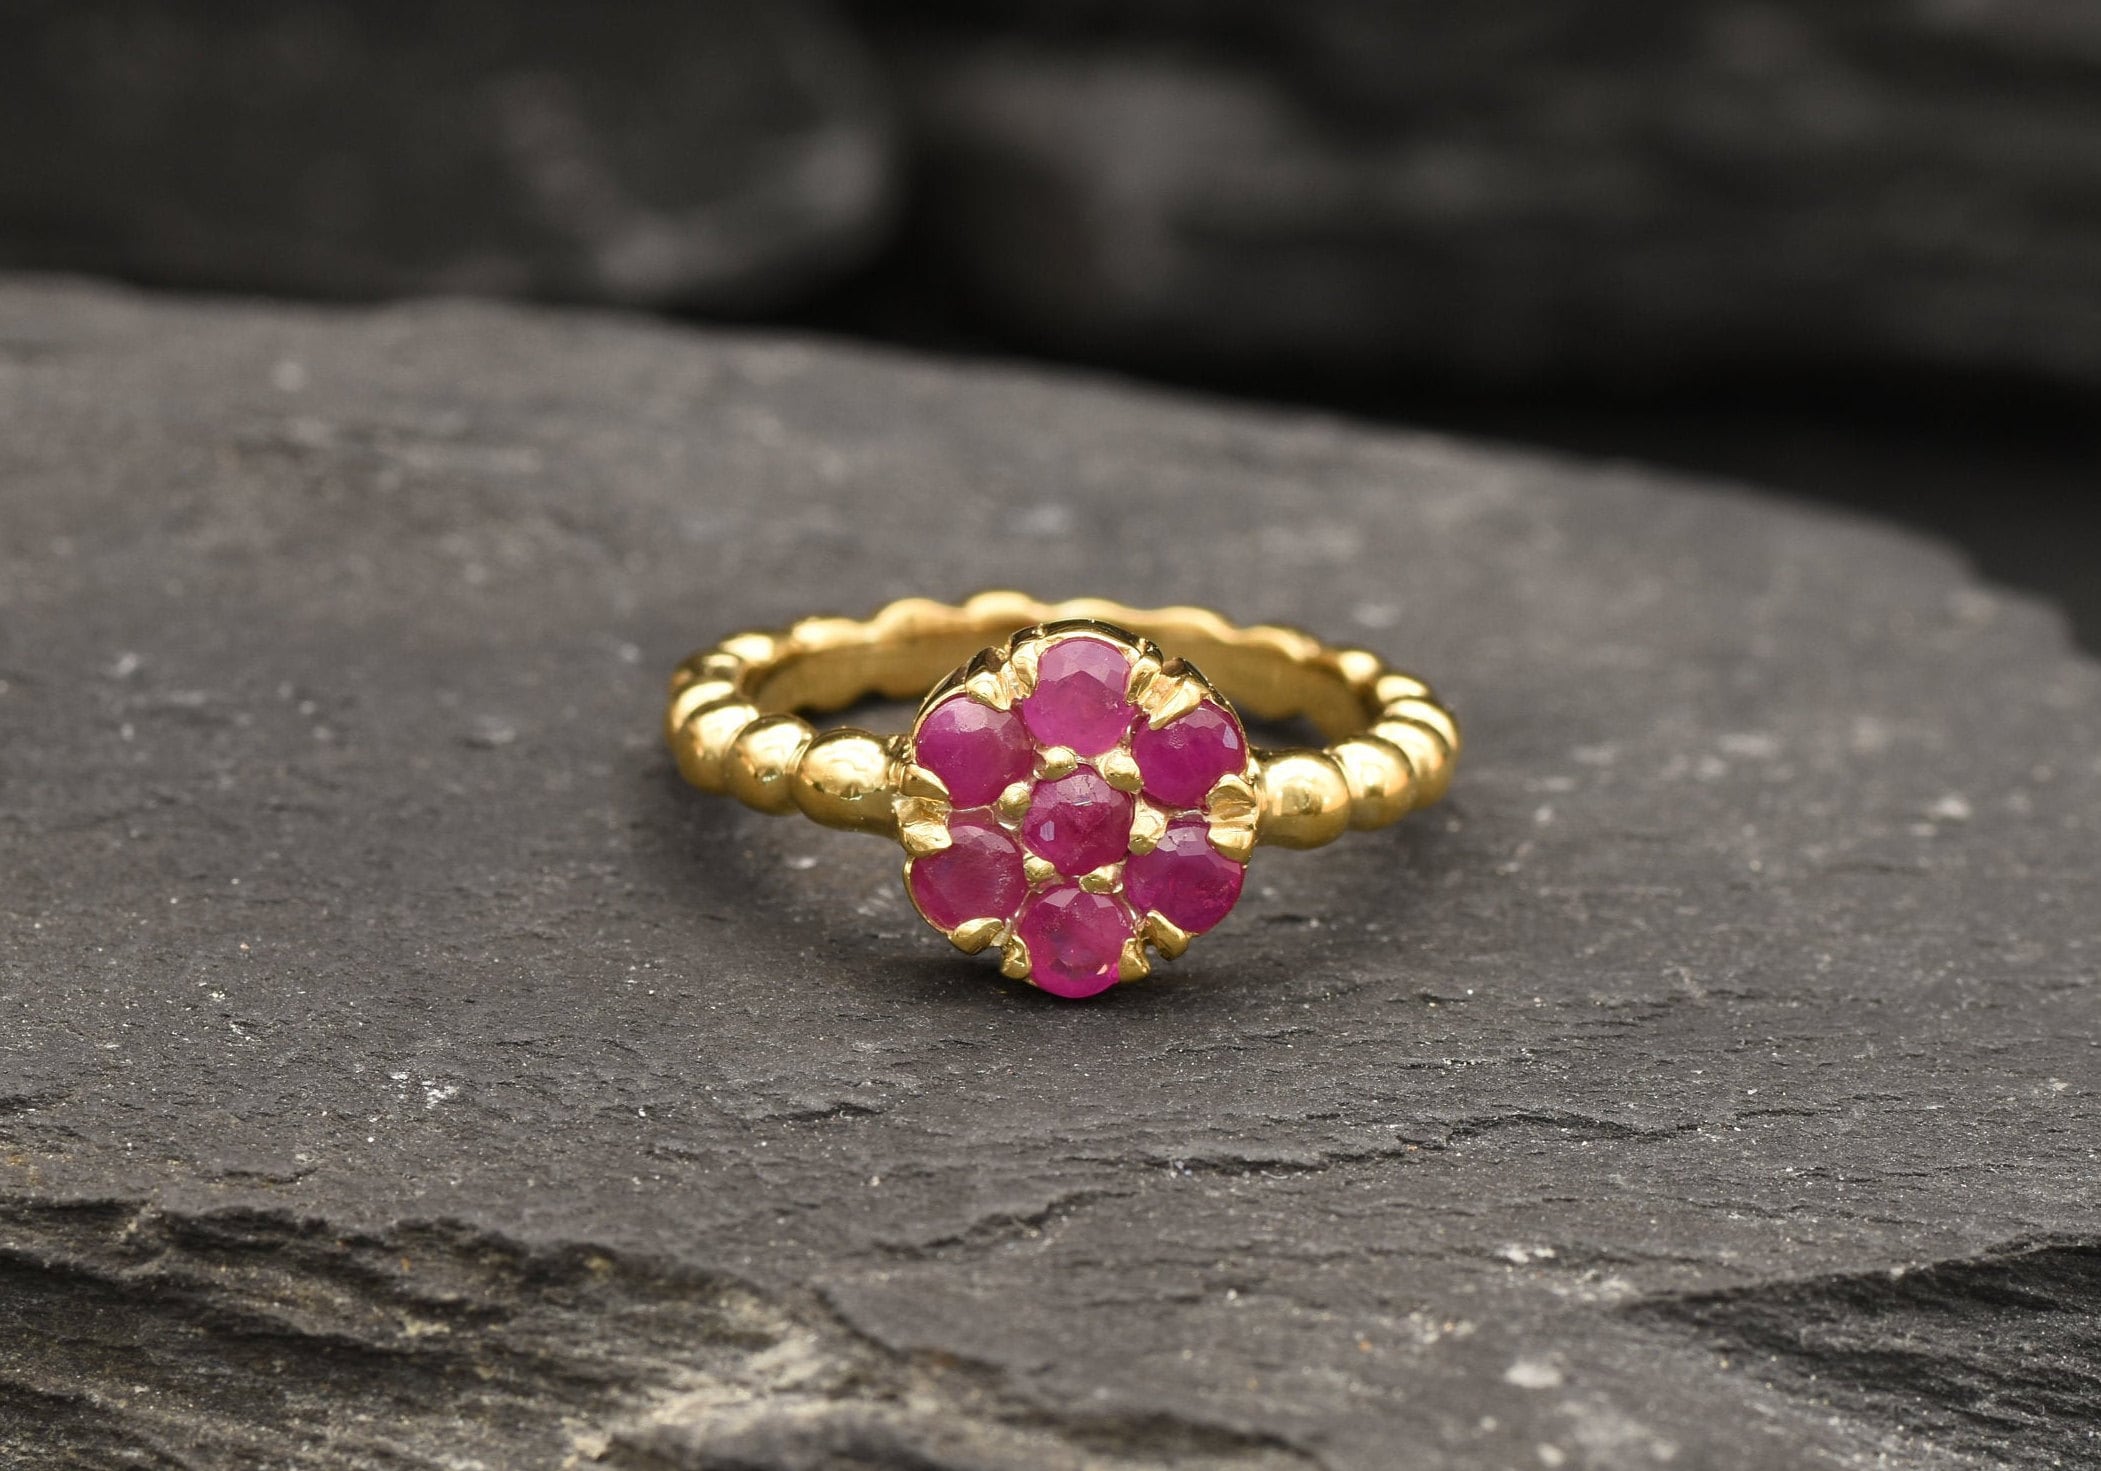 Gold Ruby Ring, Natural Ruby, Red Flower Ring, Daisy Ring, July Birthstone, Stackable Ring, Dainty Bubble Band, Gold Plated Ring, Vermeil